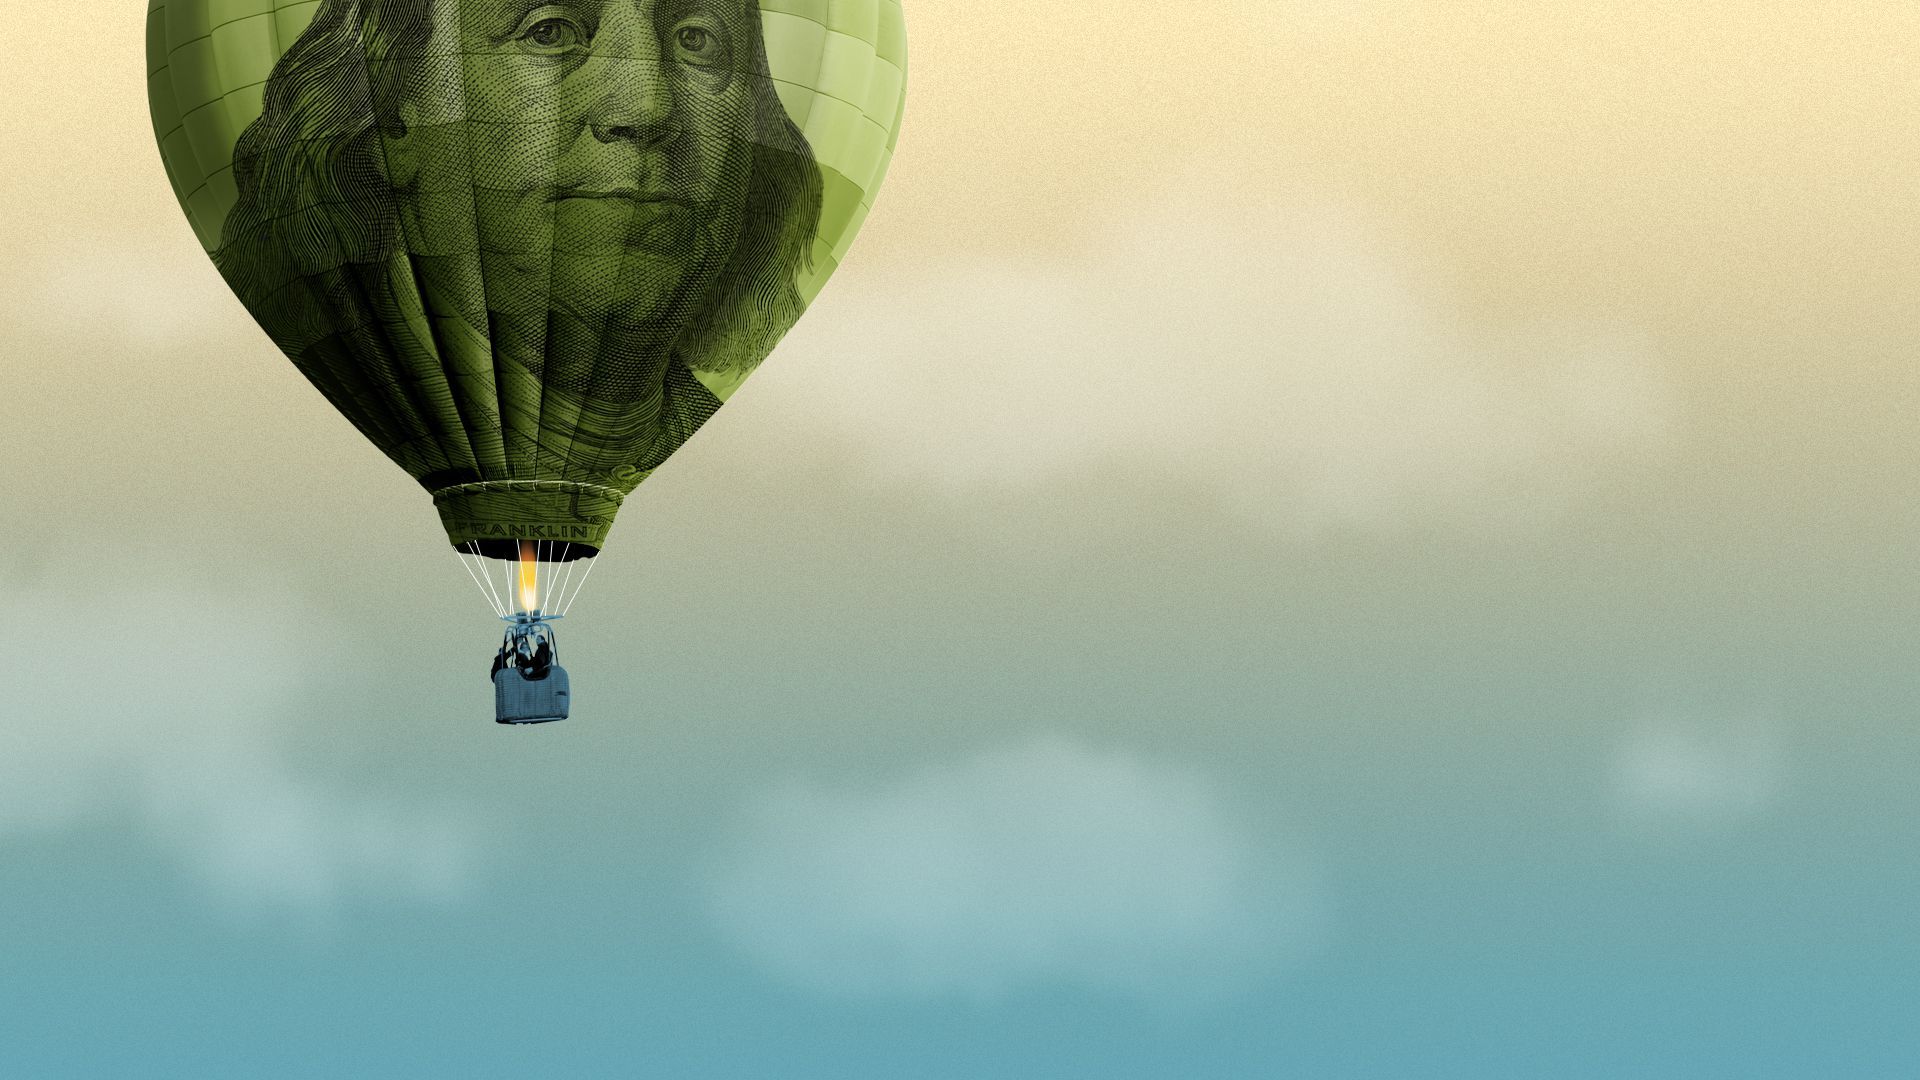 Illustration of a hot air balloon with Benjamin Franklin on it